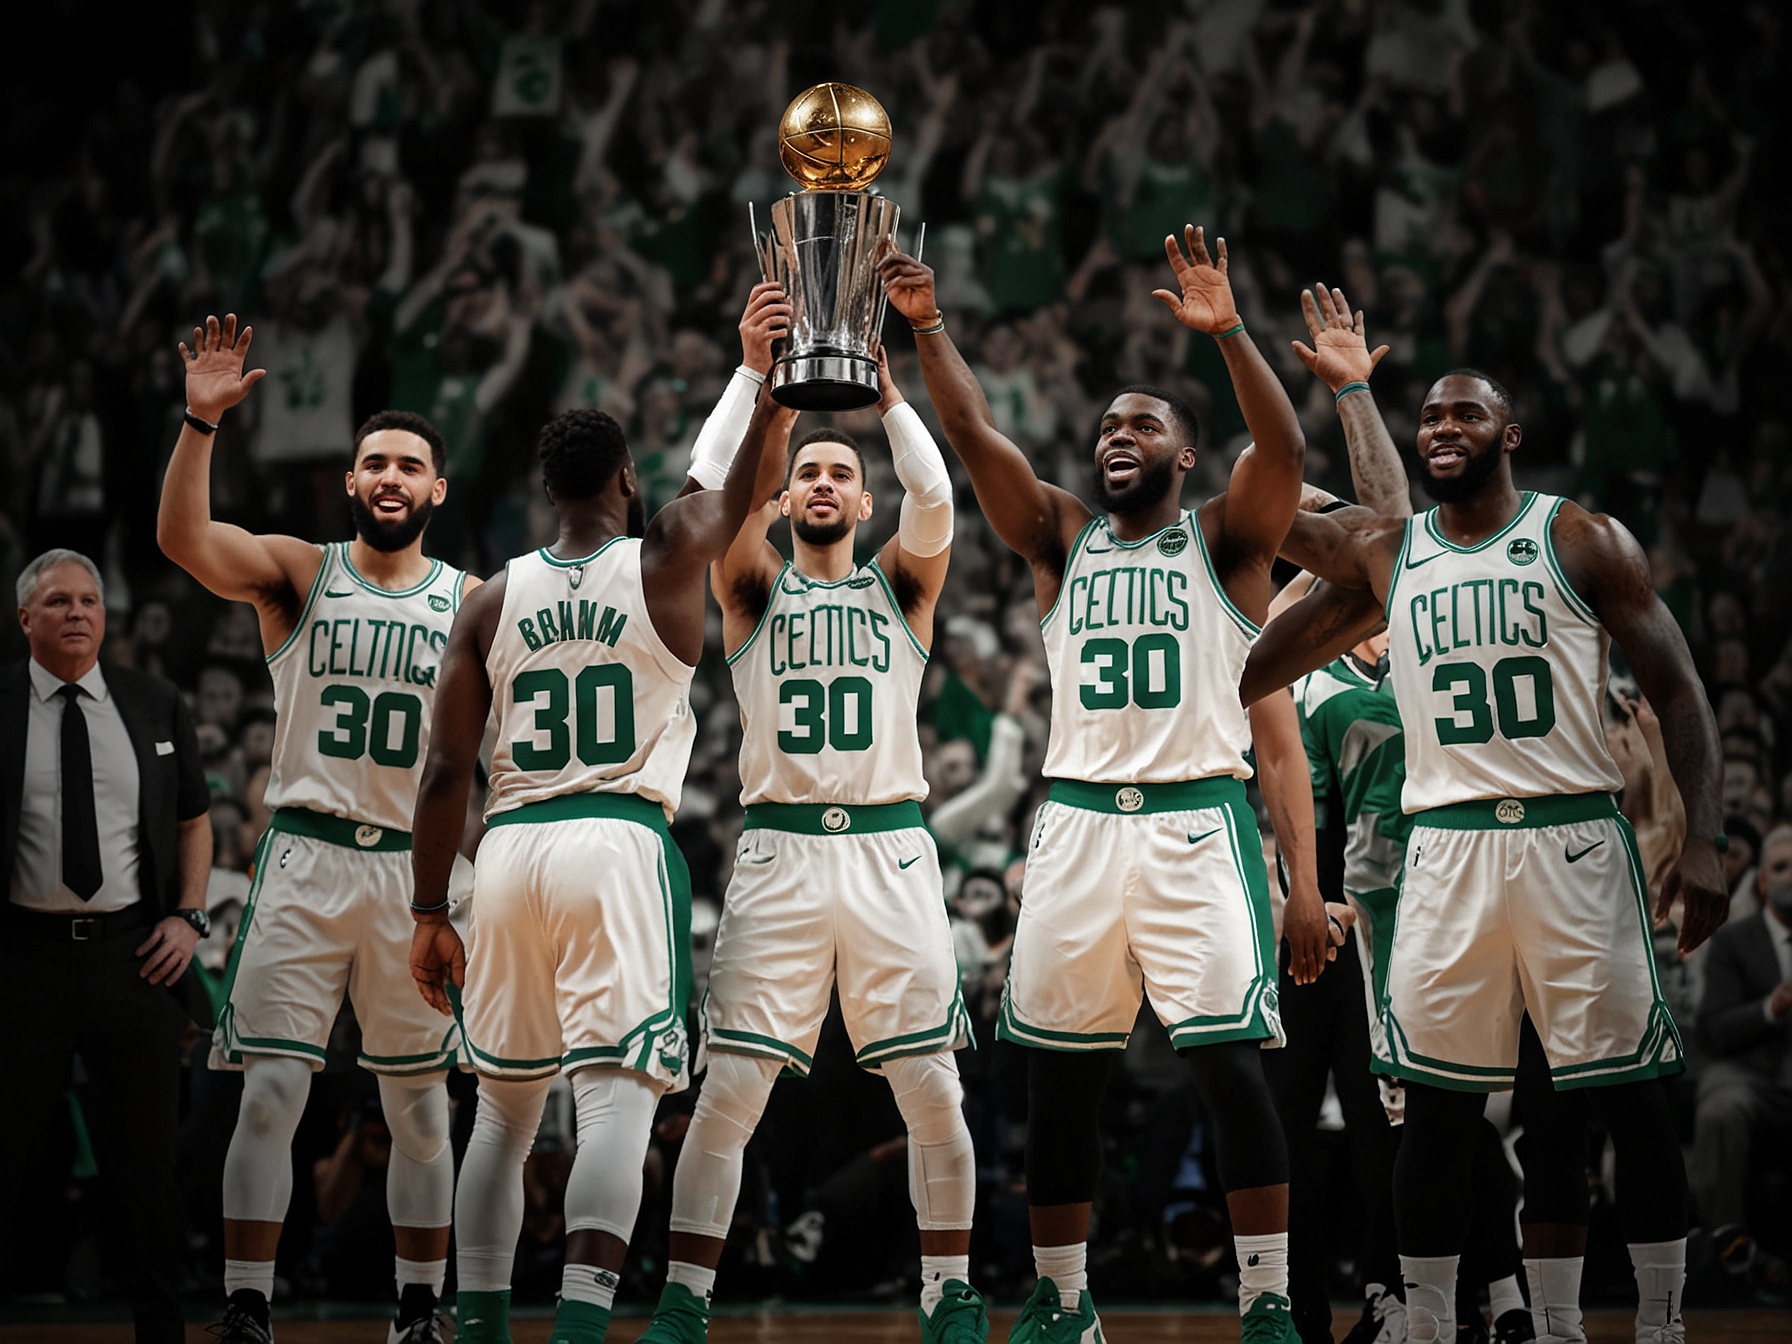 Boston Celtics' players, including Jayson Tatum and Jaylen Brown, celebrate their victory over the Dallas Mavericks in the 2024 NBA Finals, securing their 18th championship title.